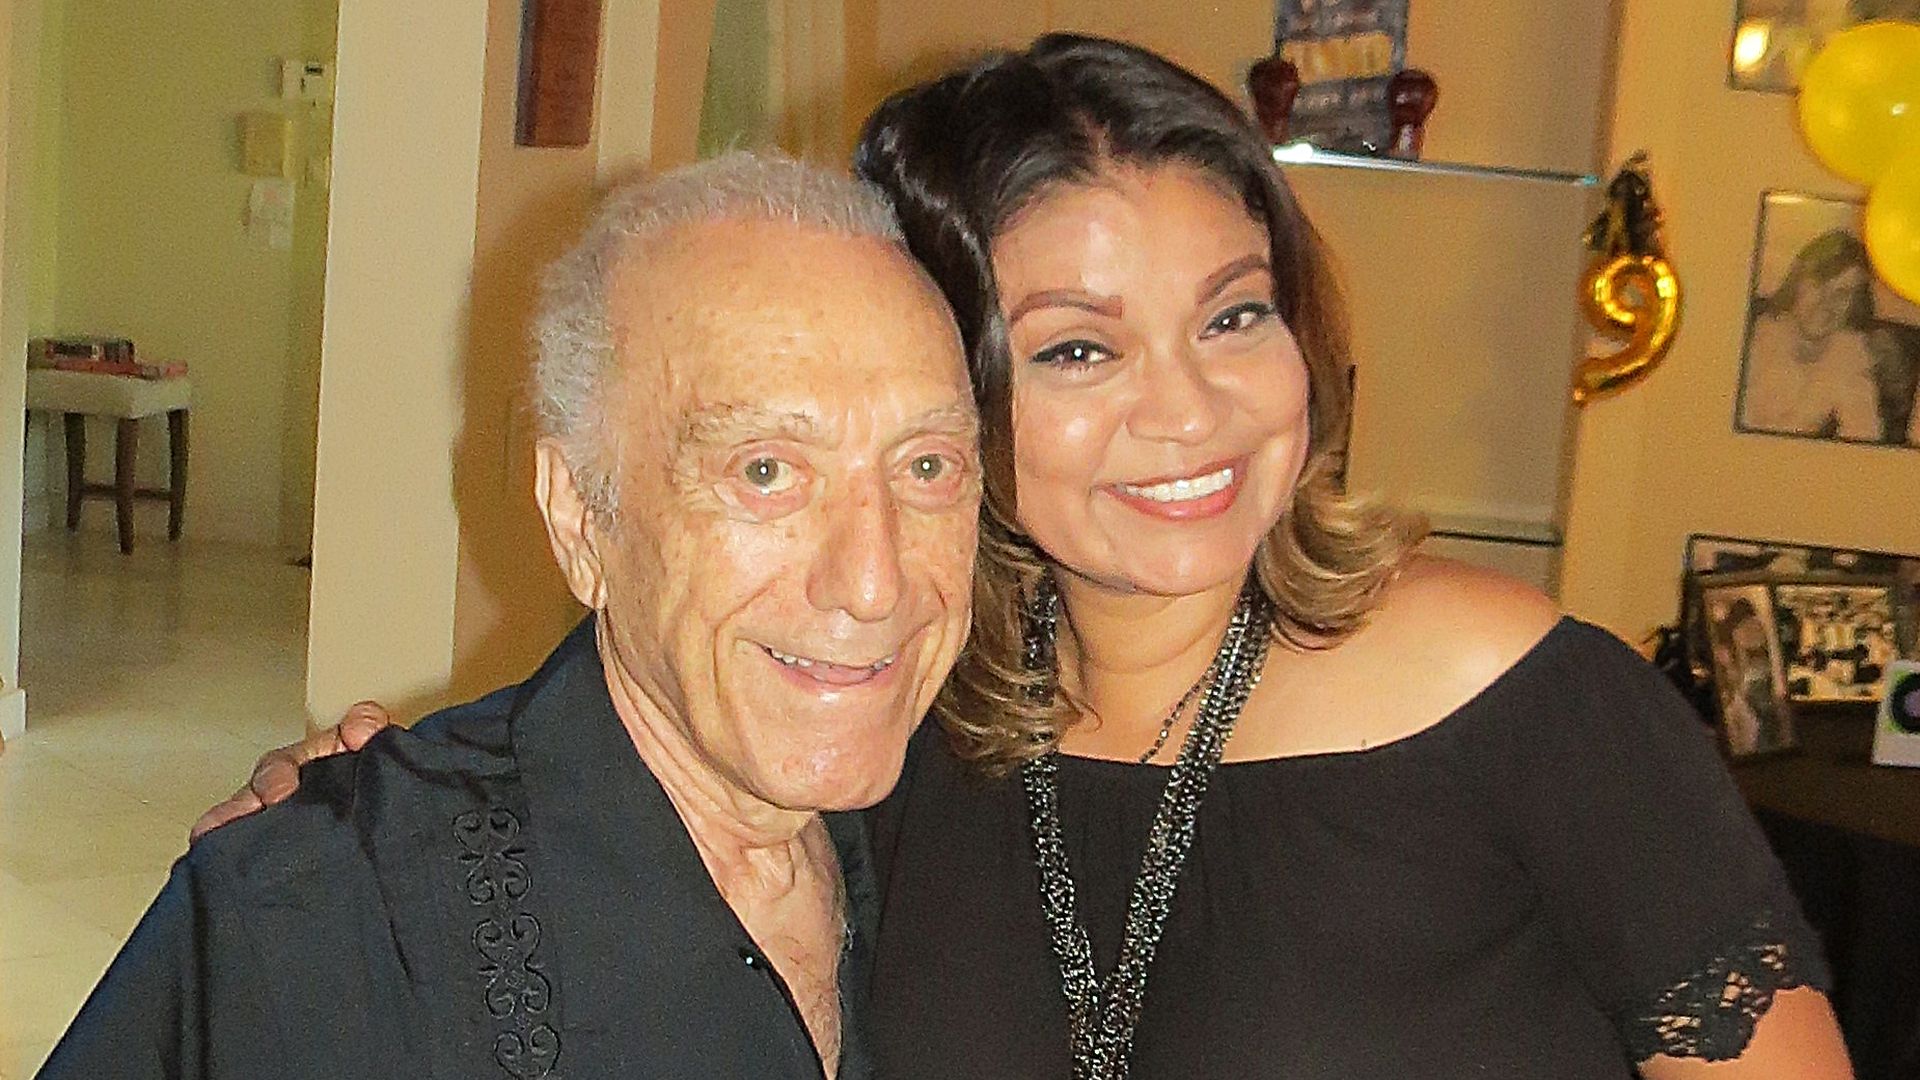 The late Art Laboe and Rebecca Luna, aka "Old School Becky Lu," pose for a photo in 2019.